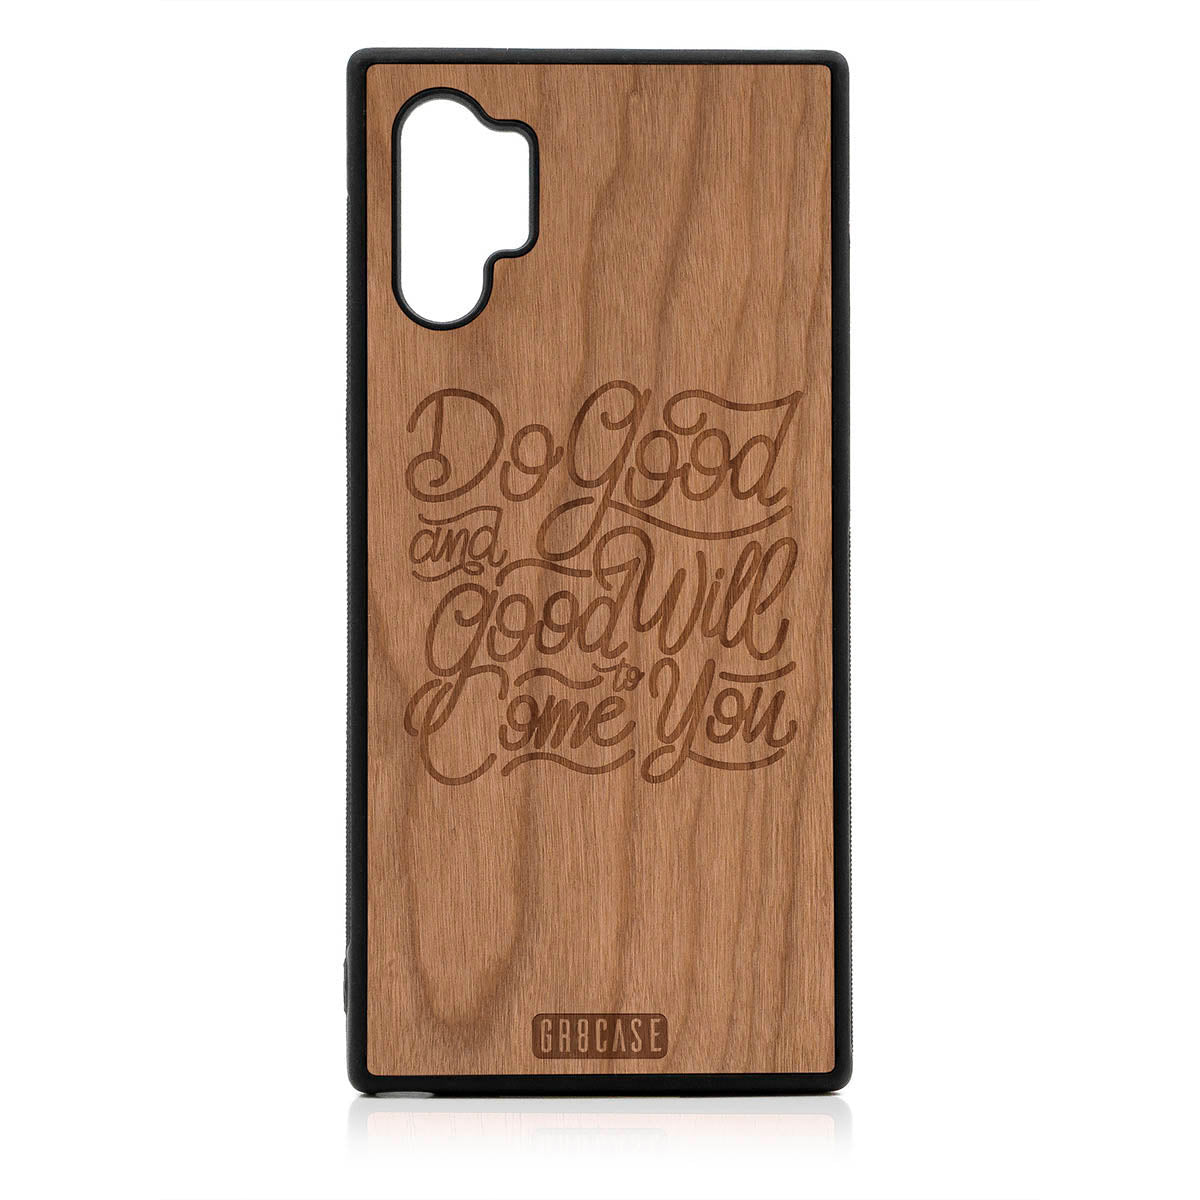 Do Good And Good Will Come To You Design Wood Case For Samsung Galaxy Note 10 Plus by GR8CASE